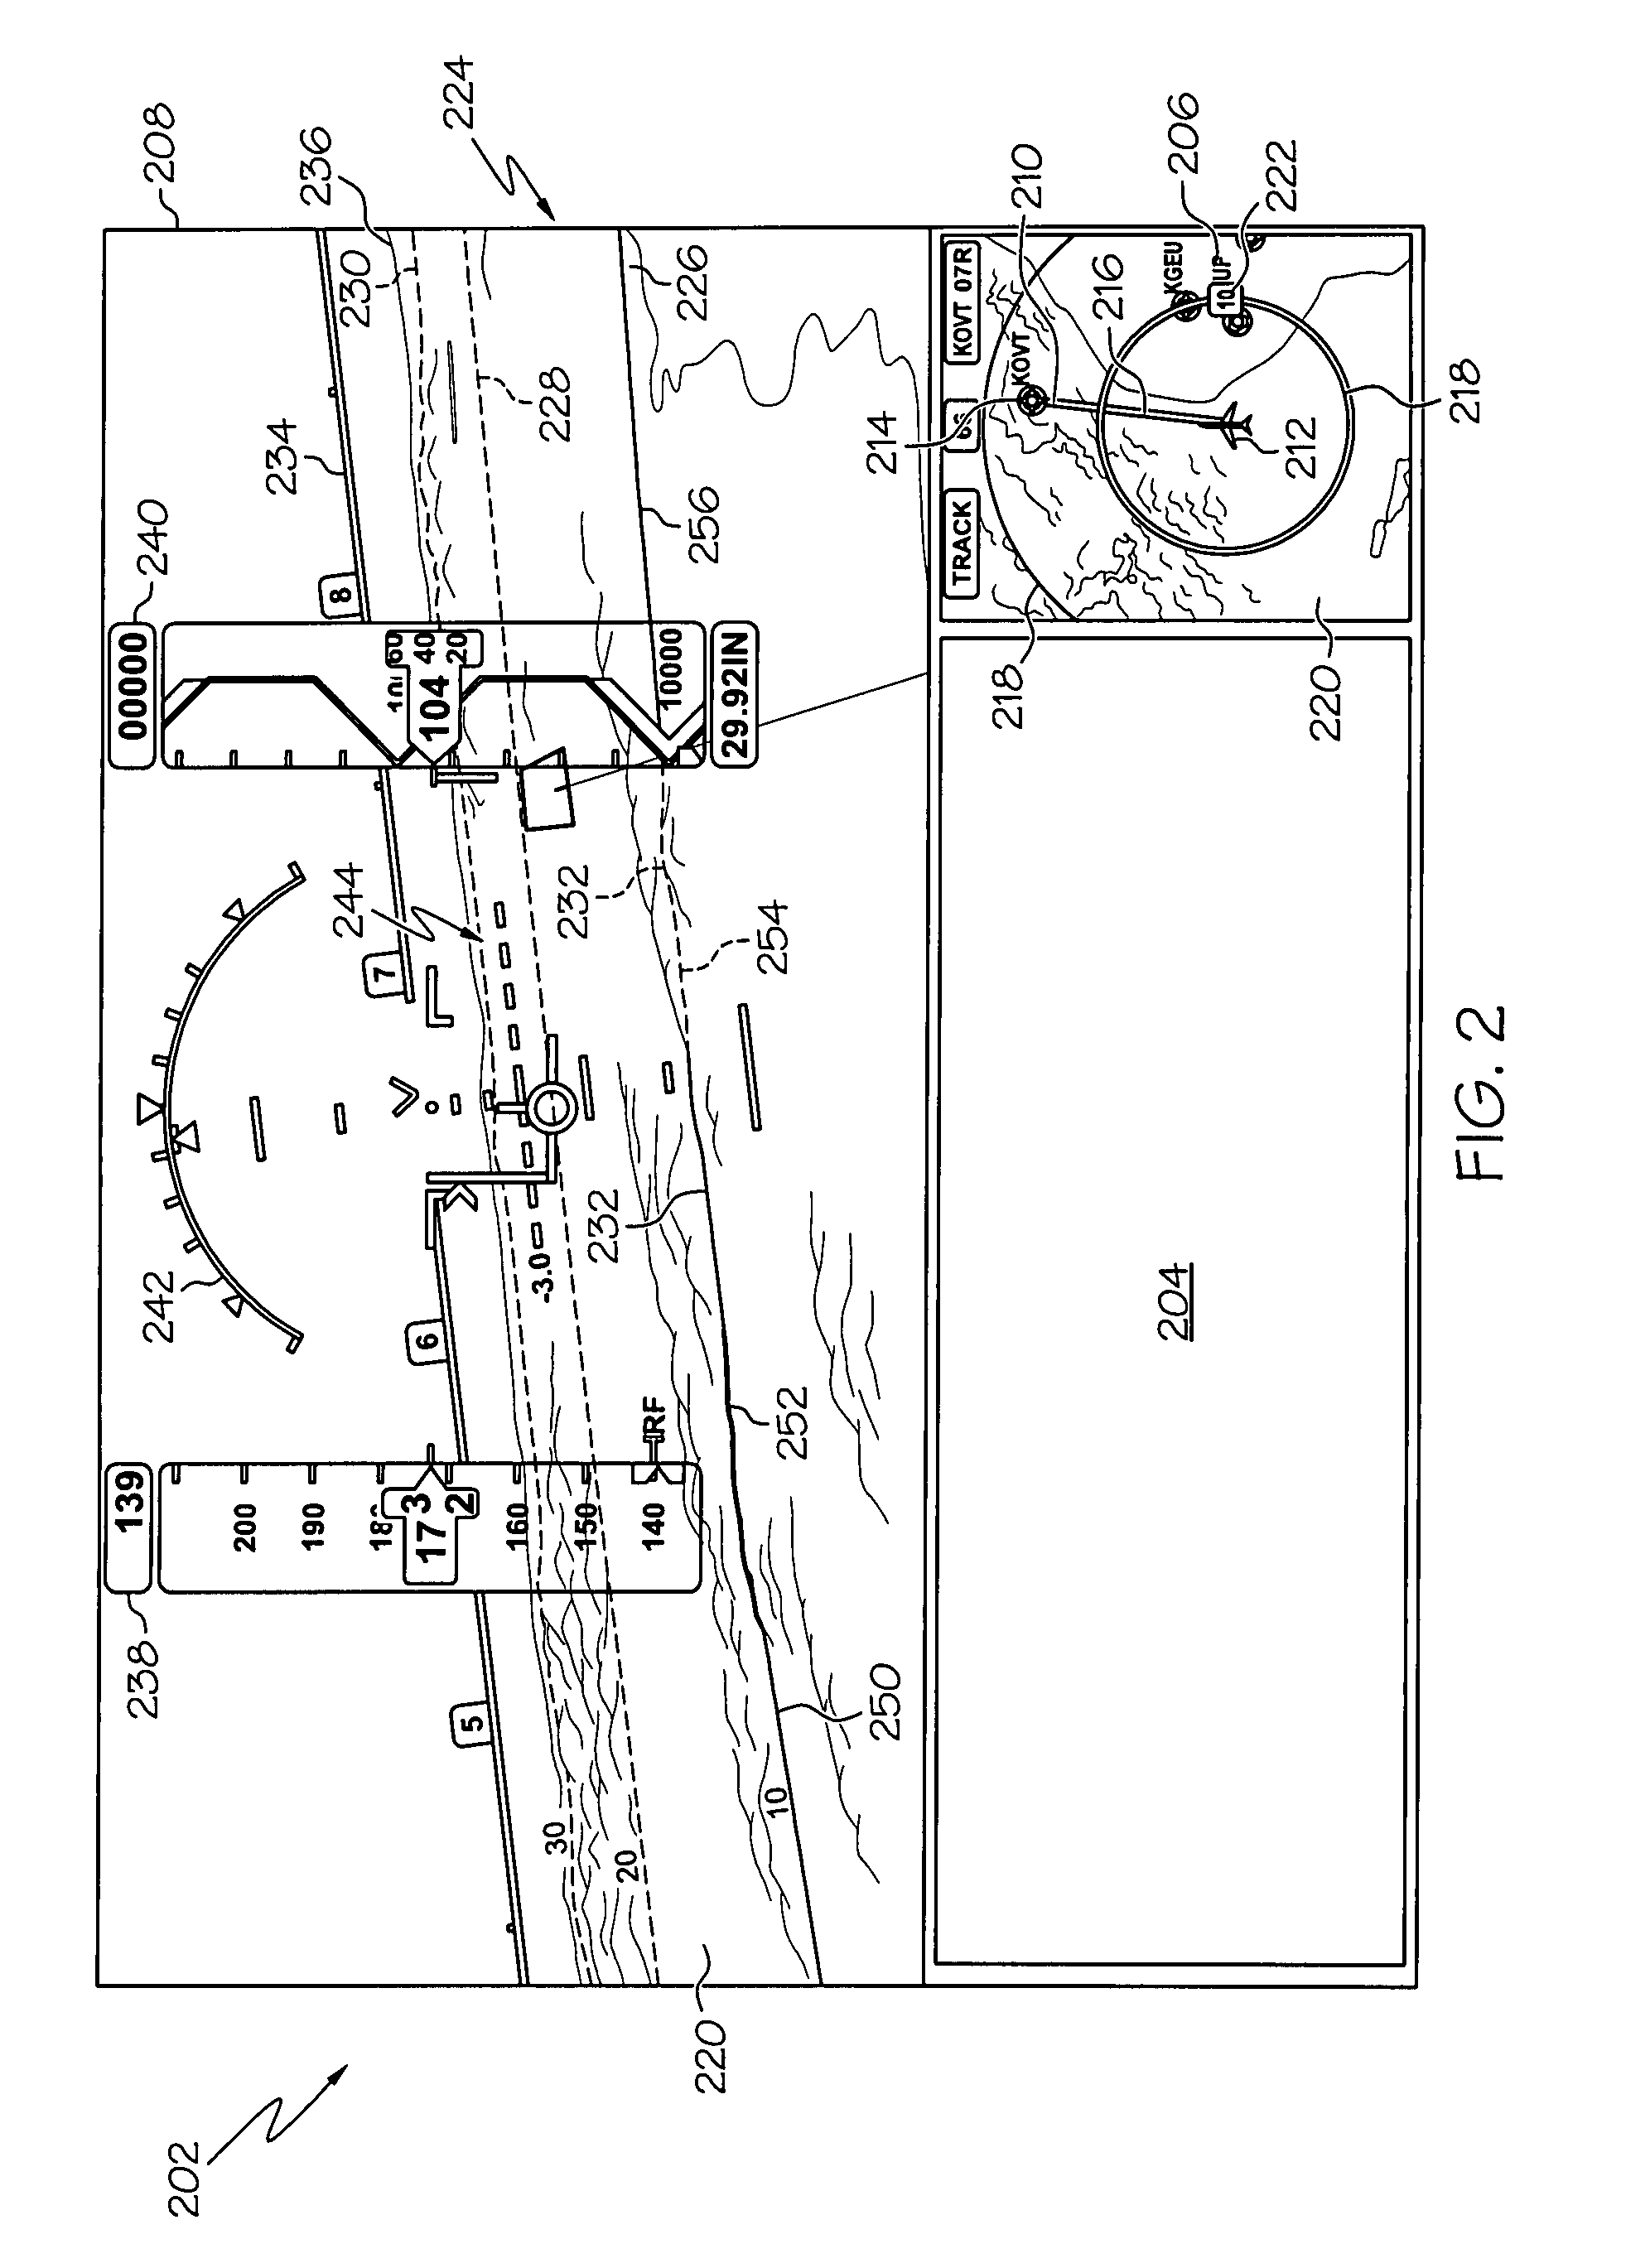 Perspective view primary flight display system and method with range lines